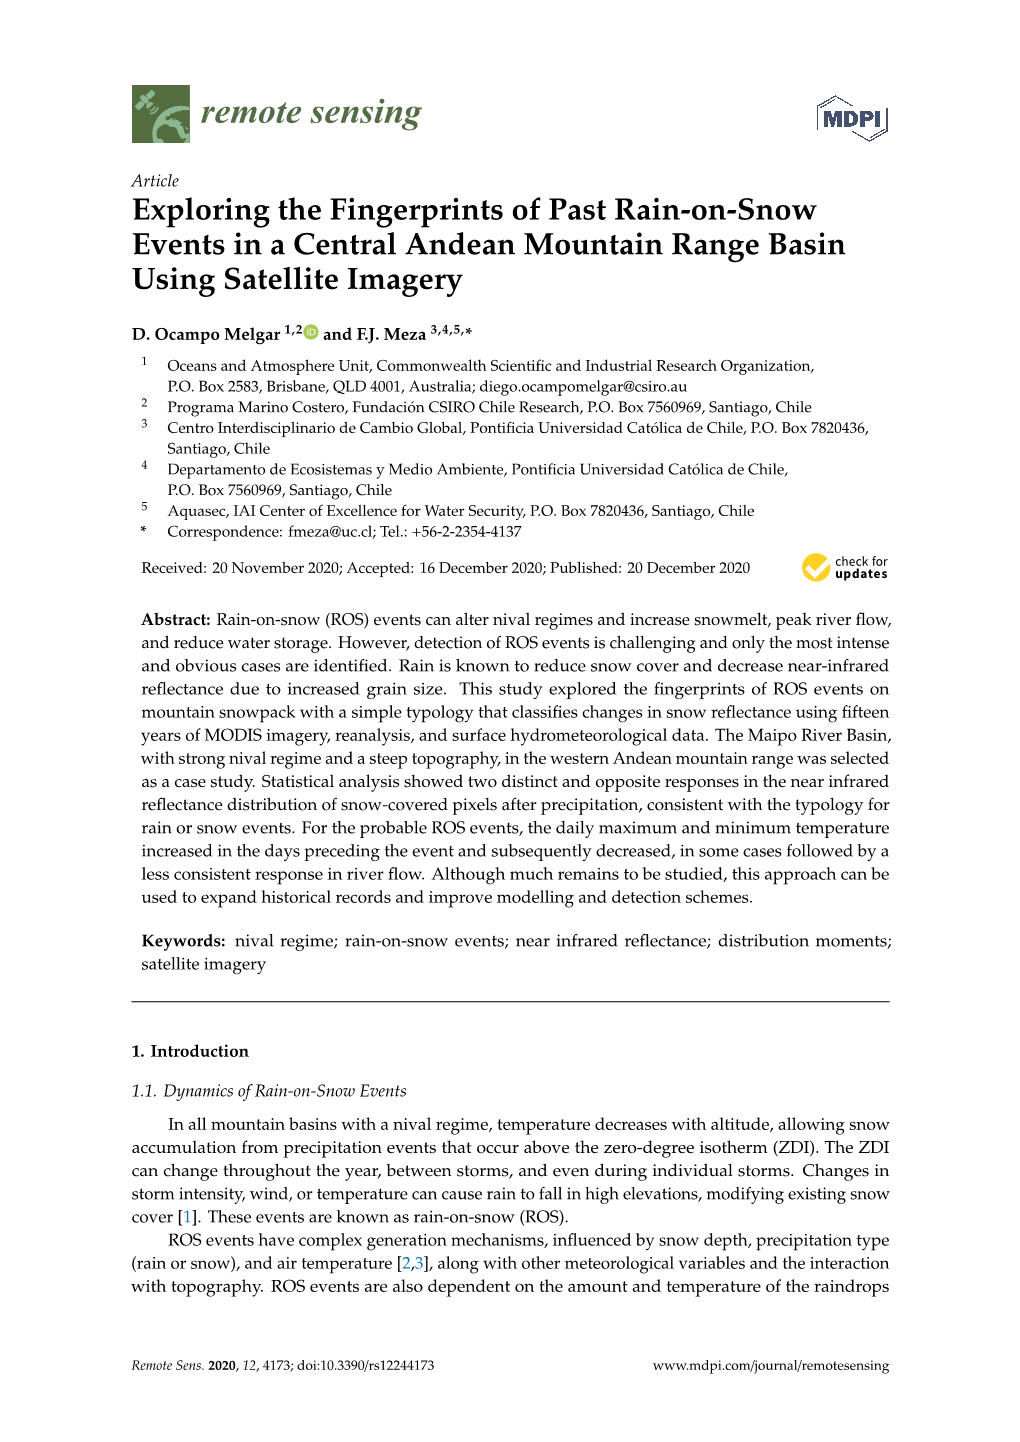 Exploring the Fingerprints of Past Rain-On-Snow Events in a Central Andean Mountain Range Basin Using Satellite Imagery